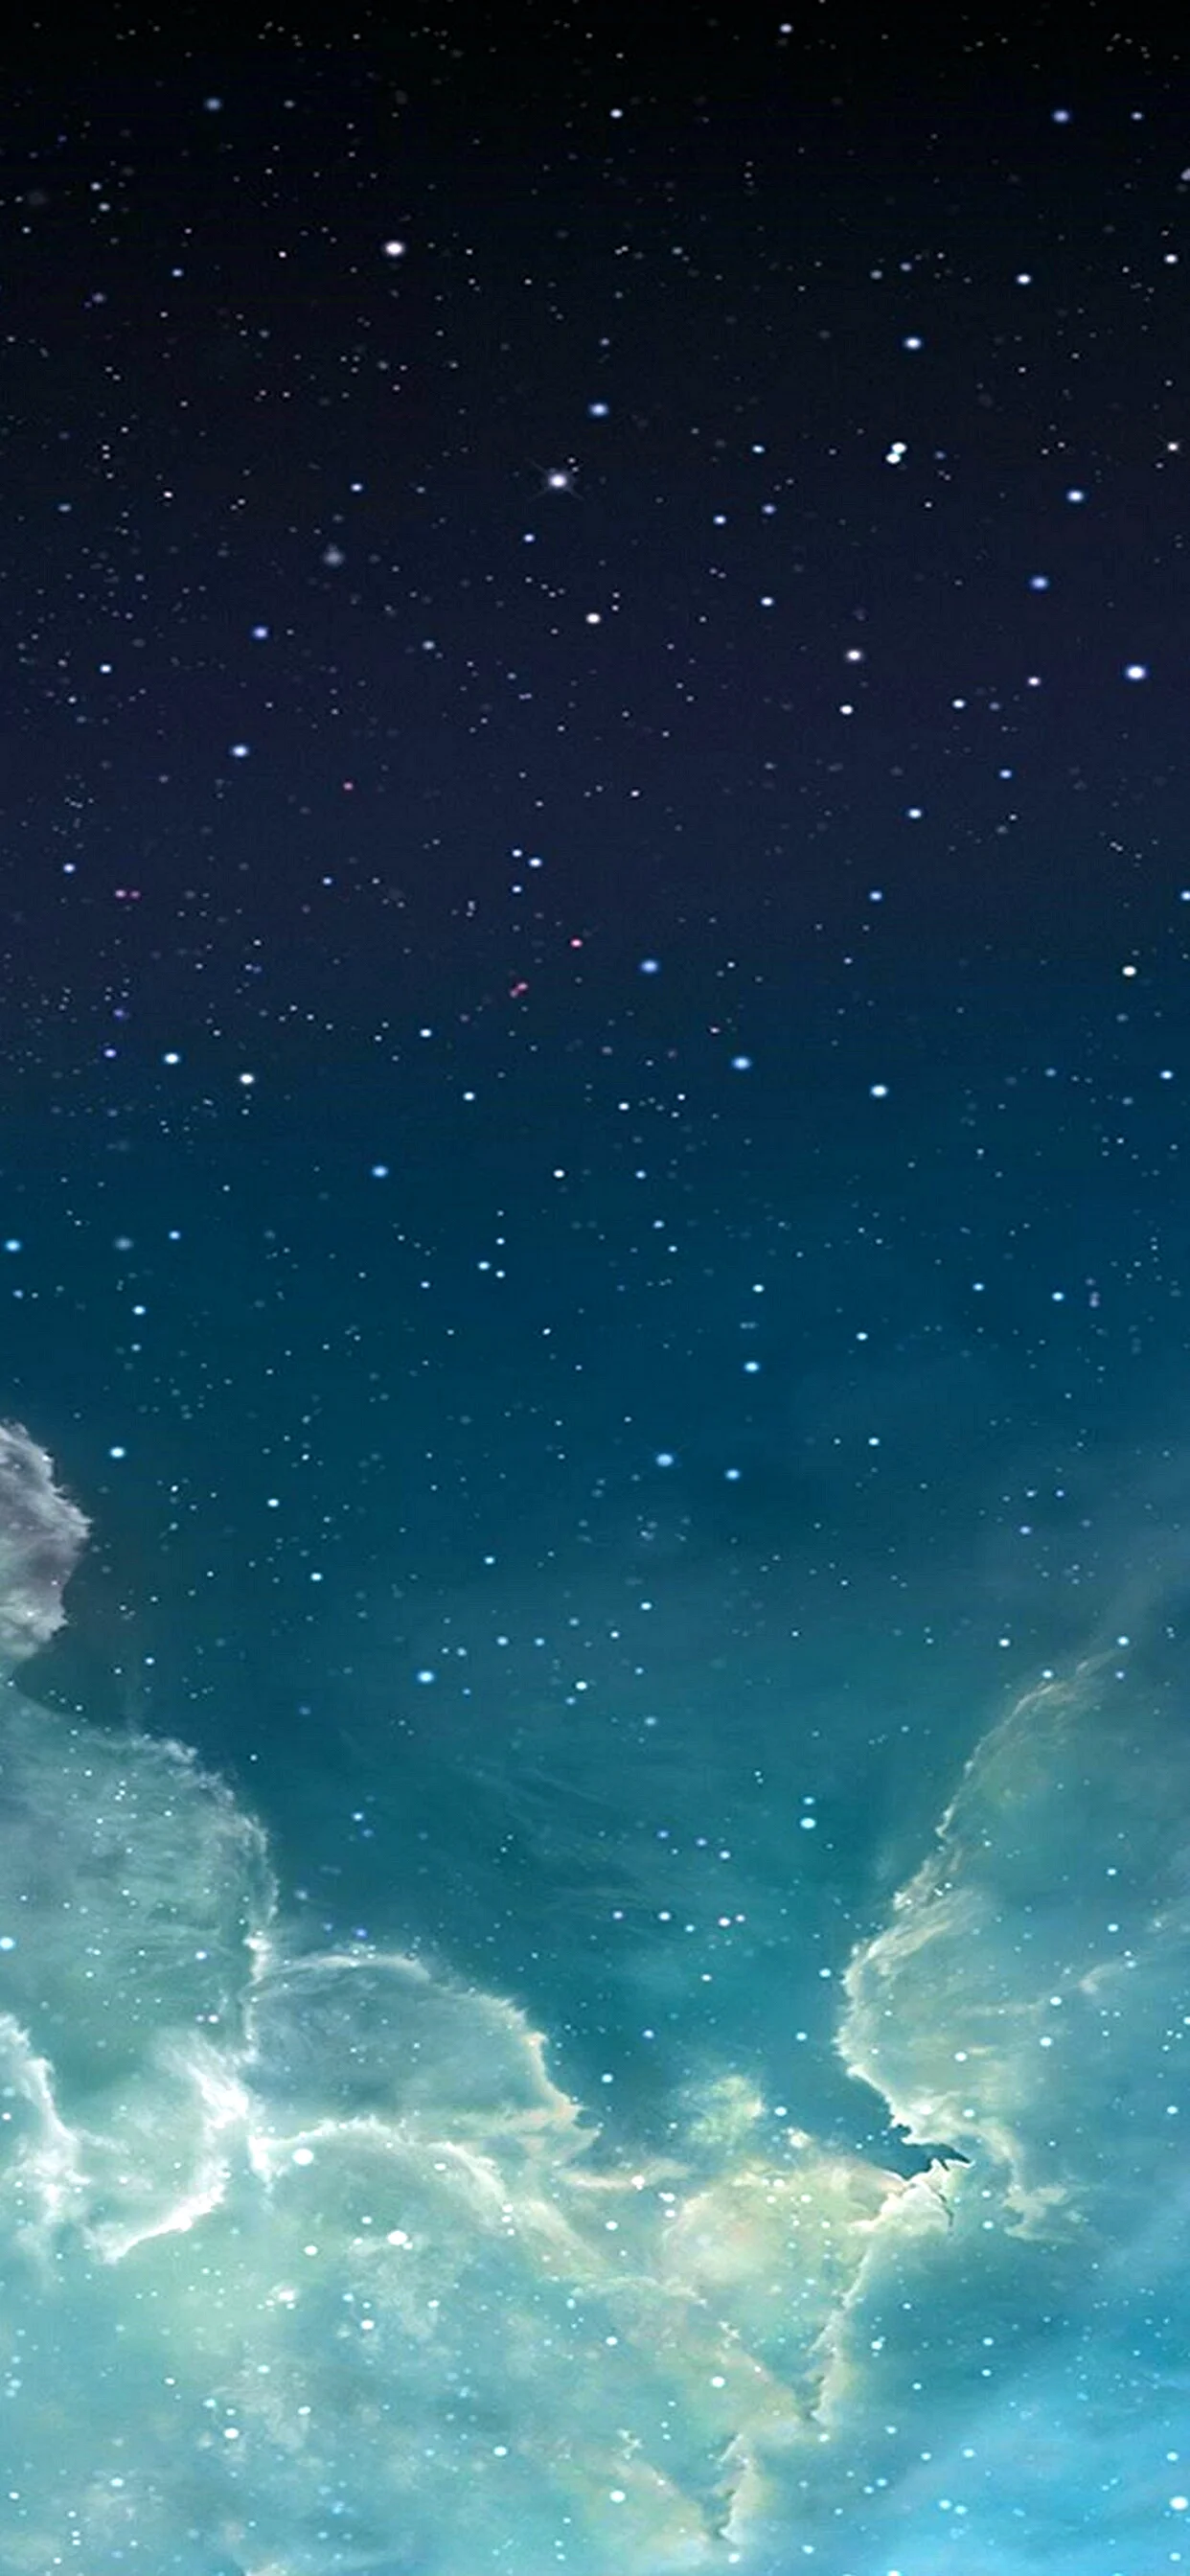 Starry Sky Wallpaper for iPhone 11 Pro Max